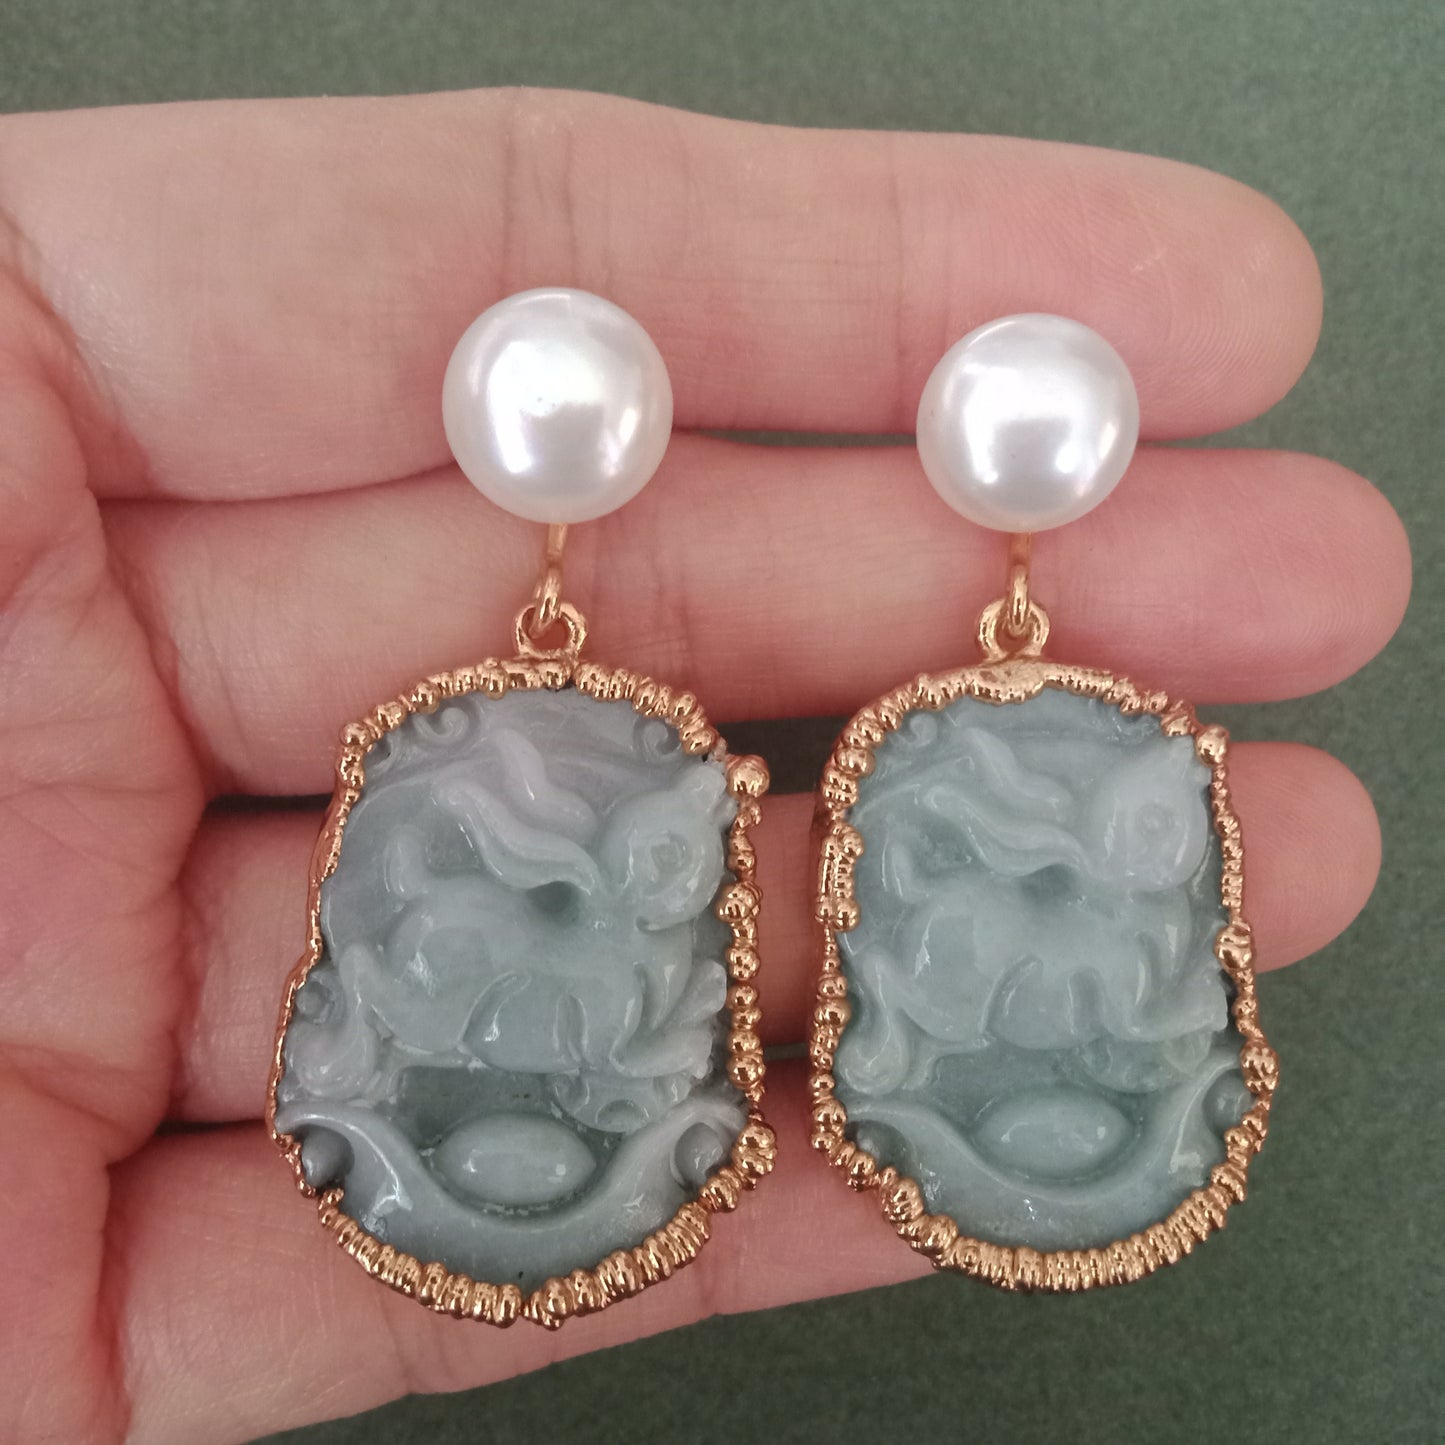 Jade hopping hare earrings with FW pearls